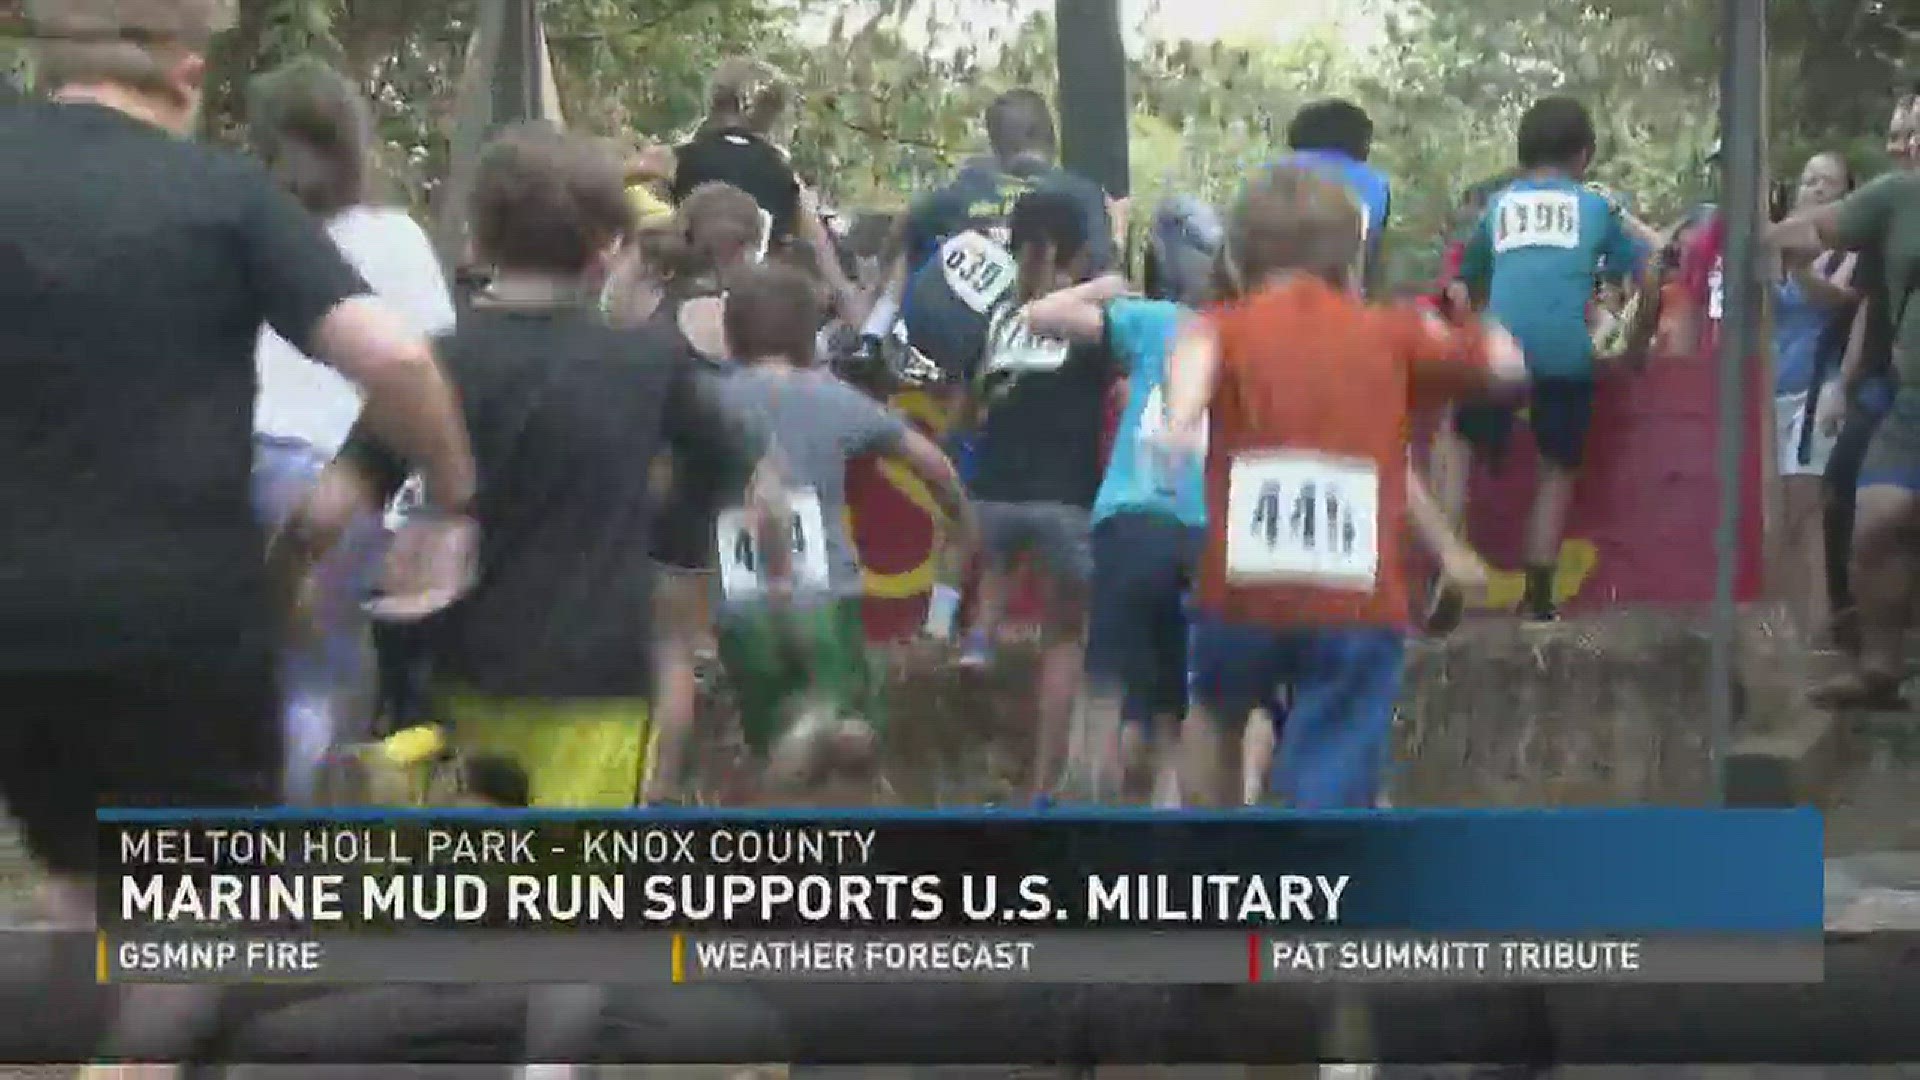 Marines, children and others ran in the mud to help benefit the U.S. Marine Corps.